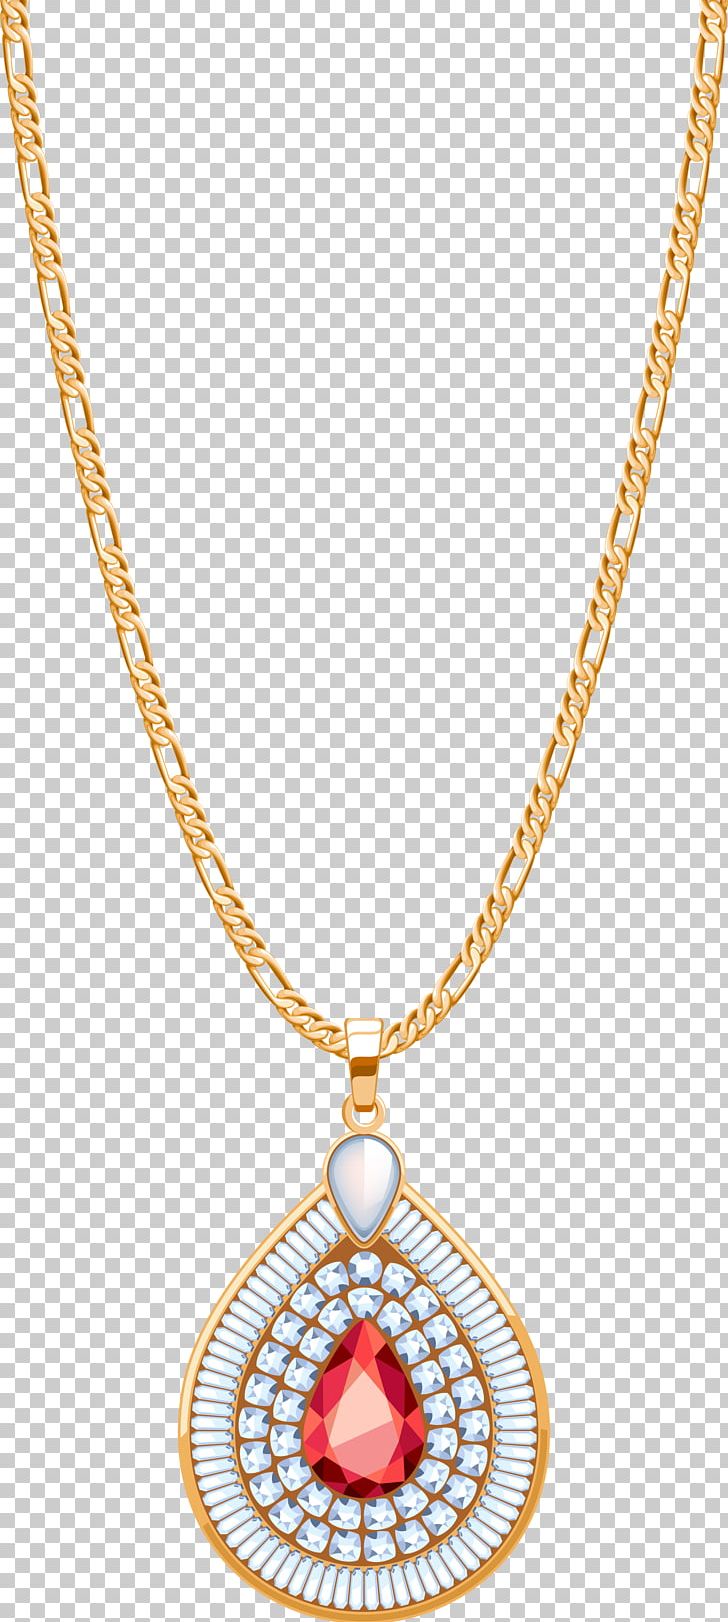 Locket Jewellery Necklace Diamond PNG, Clipart, Bitxi, Body Jewelry, Body Piercing Jewellery, Brilliant, Chain Free PNG Download